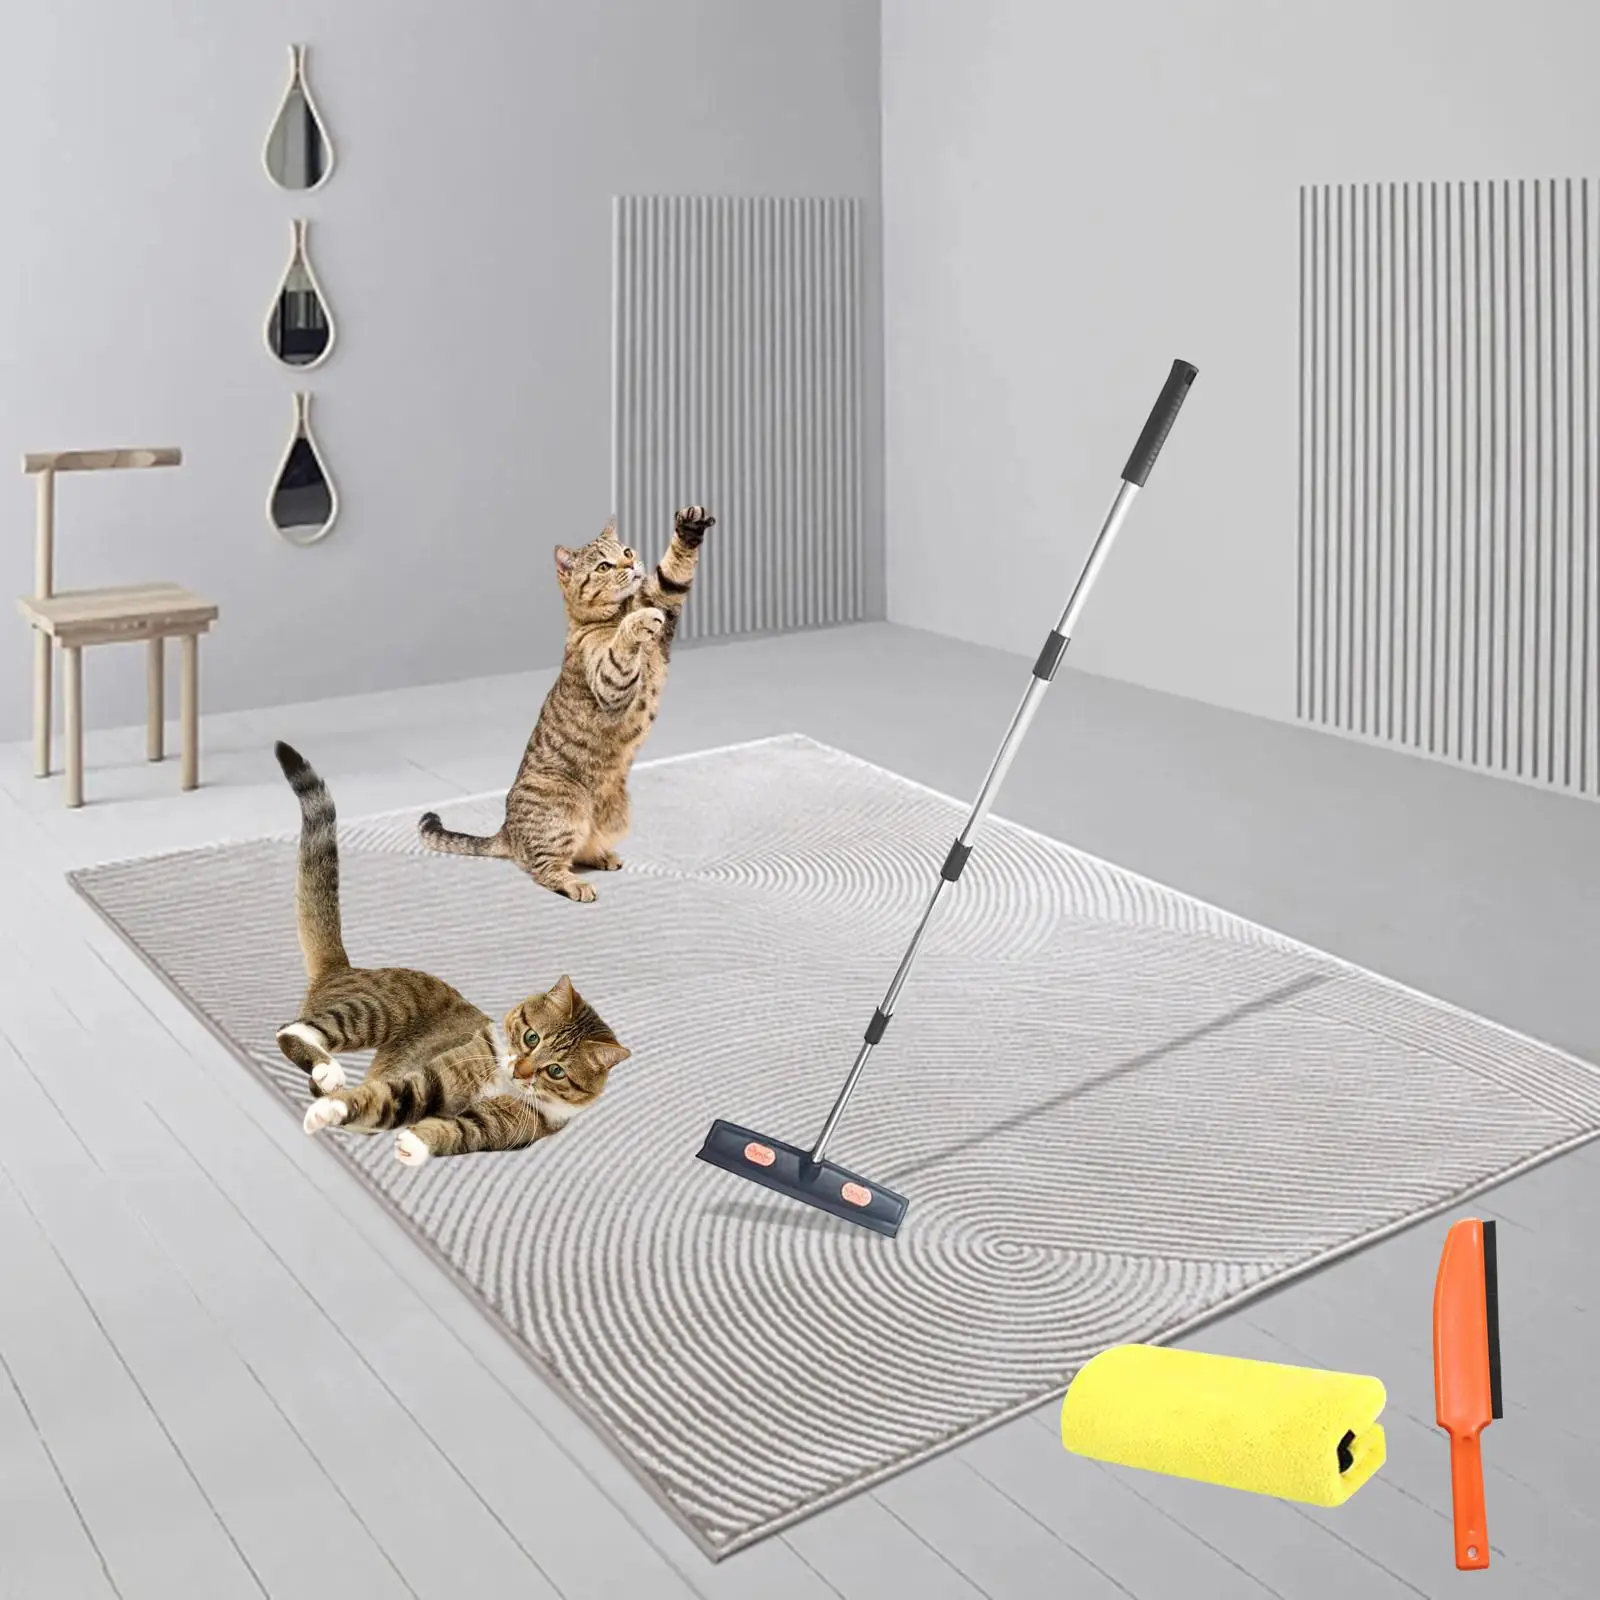 Pet Hair Remover Broom Carpet Rake with Telescopic Handle Cleaning Tool Pet Accessories Pet Hair Removal Broom for Tile Carpet